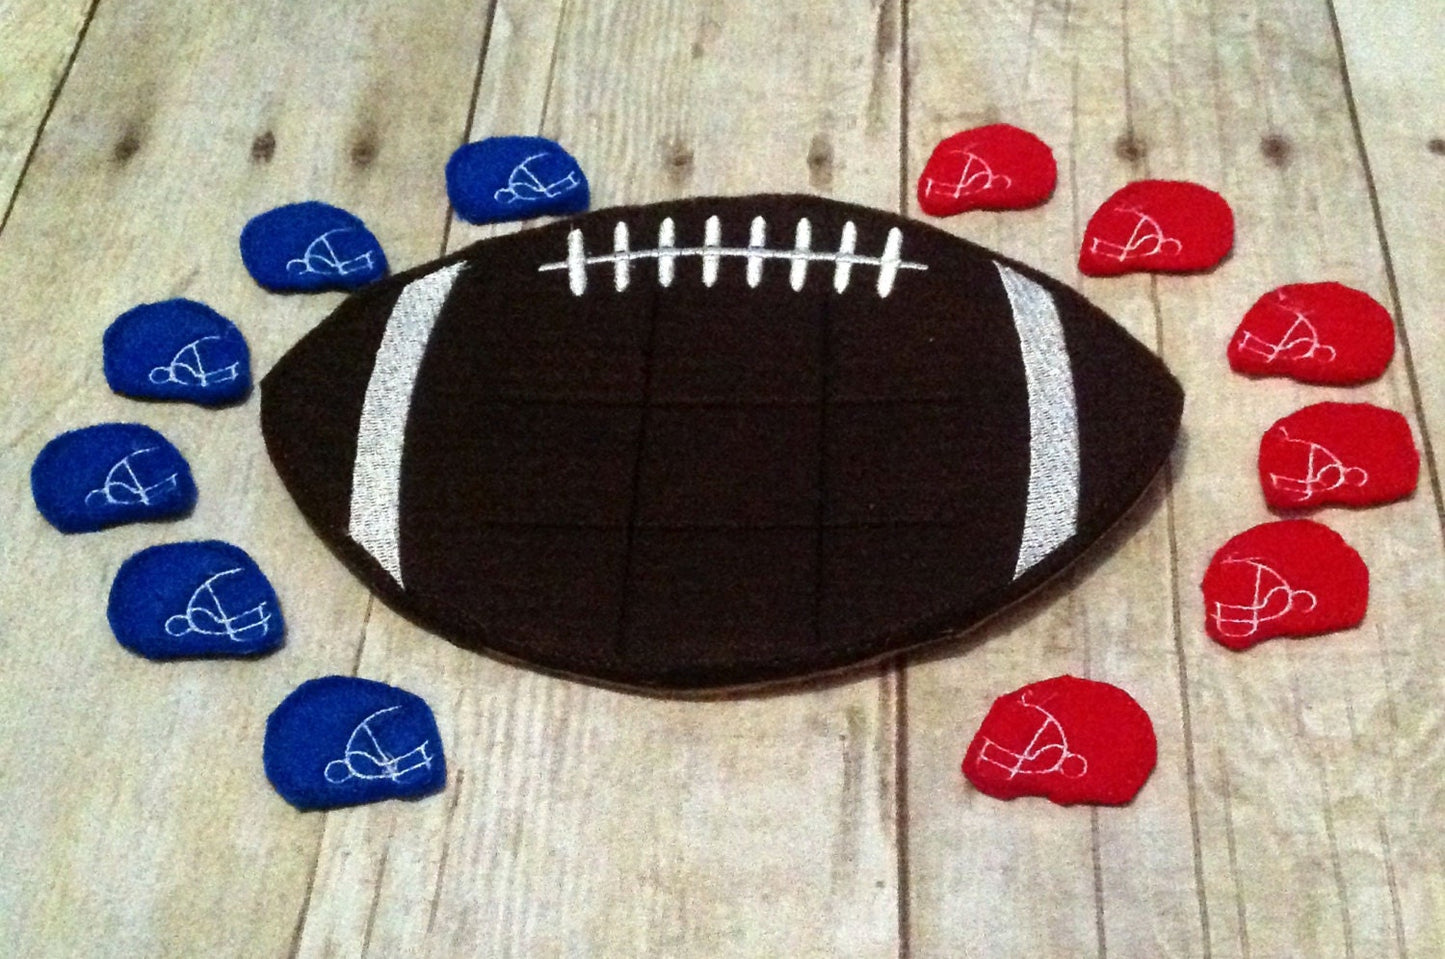 Are you ready for some football handcrafted football tic tac toe game for boys and girls. Can be used as a gift or party favor.